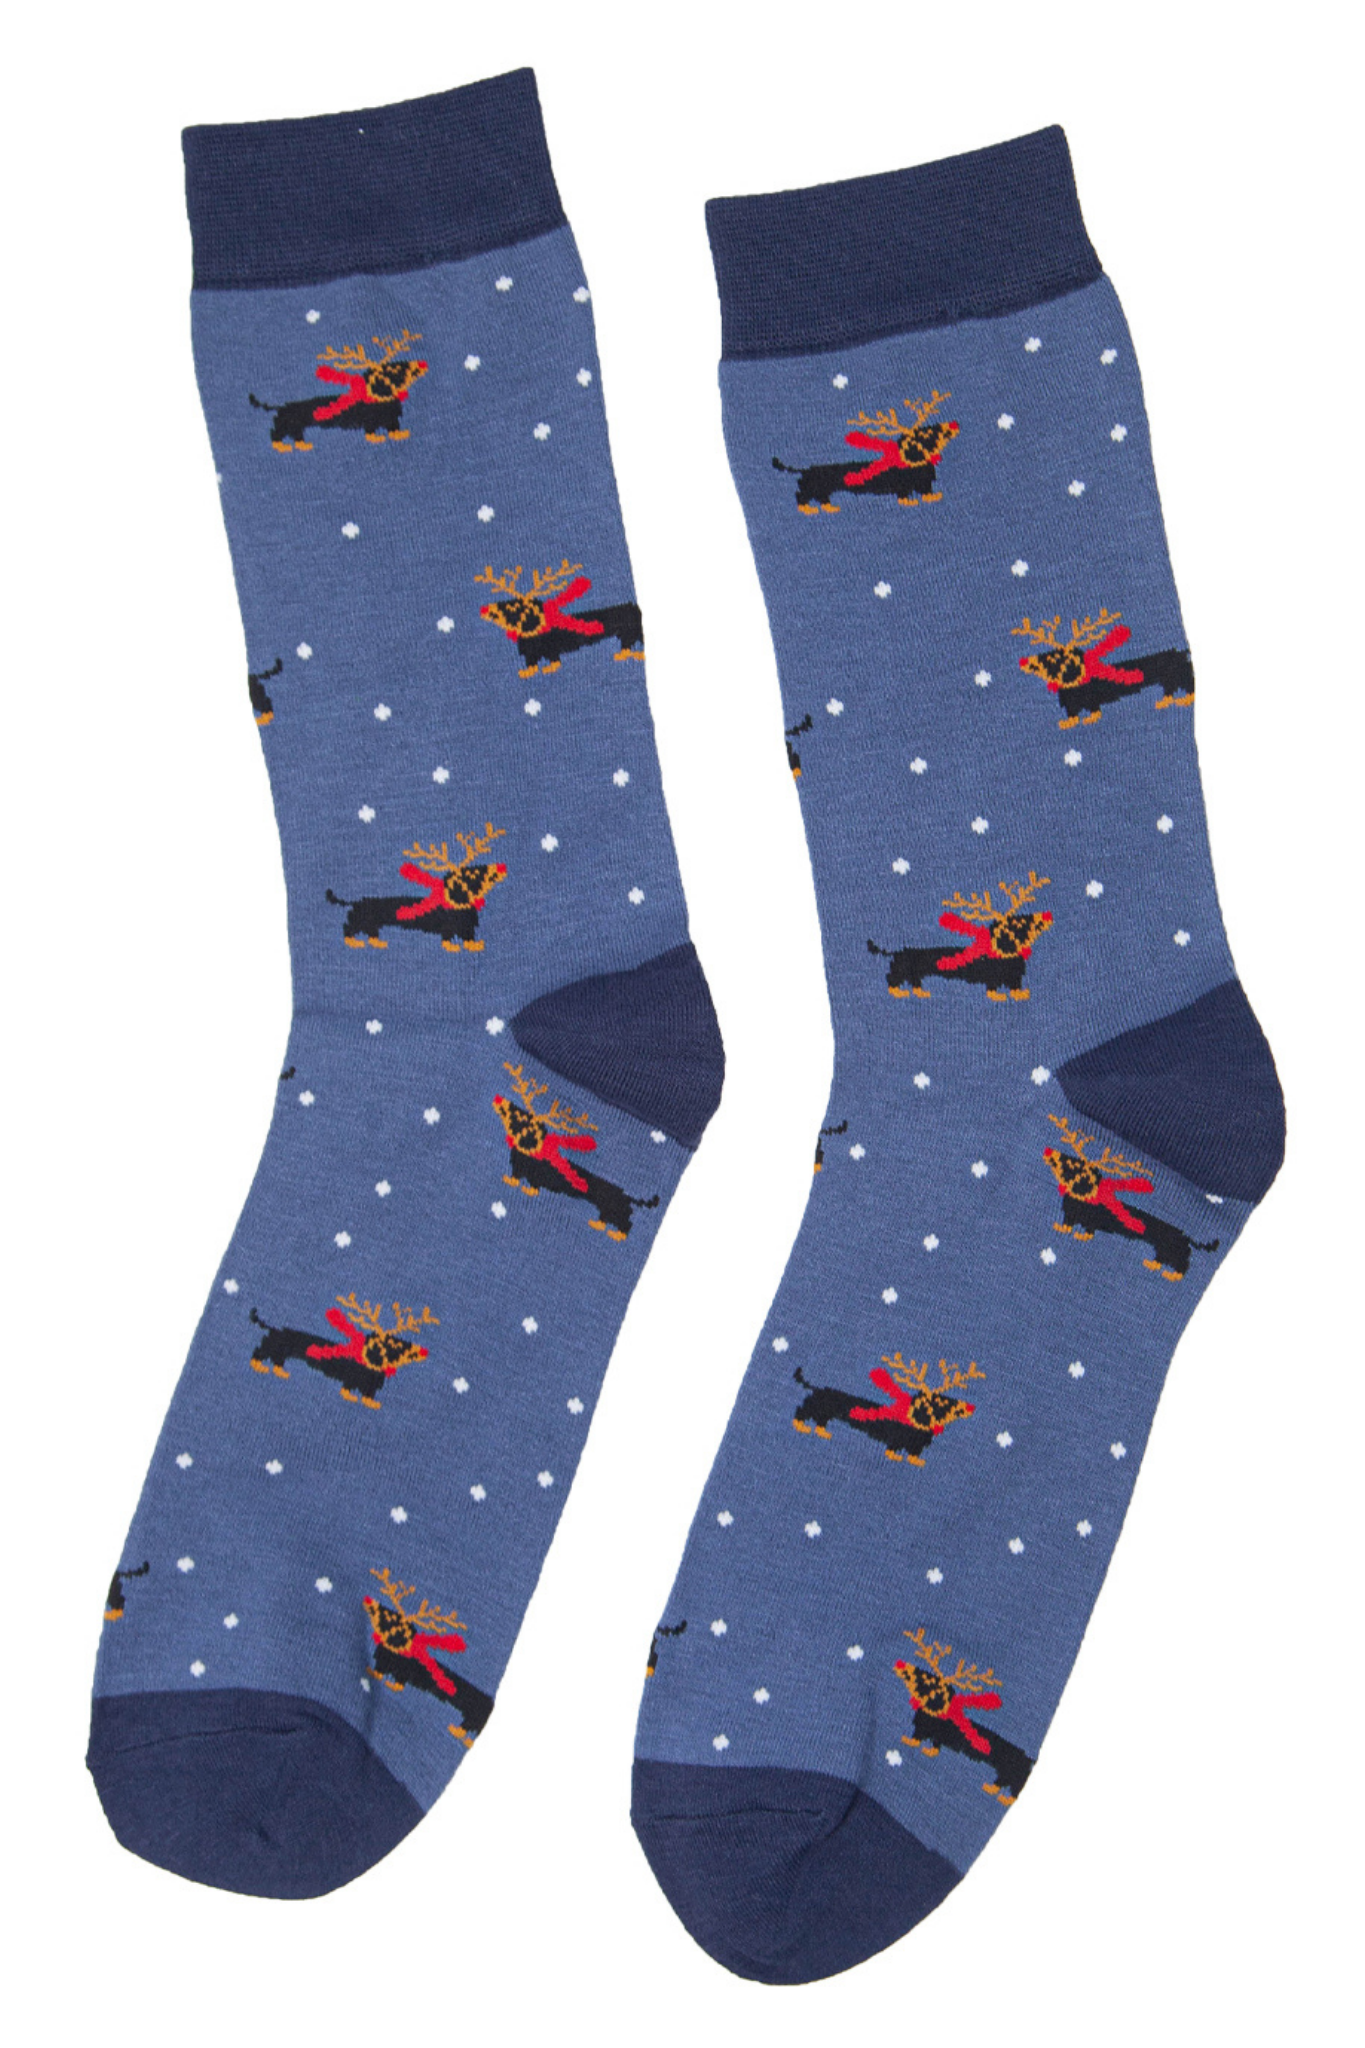 blue xmas novelty socks with dachshunds wearing reindeer antlers